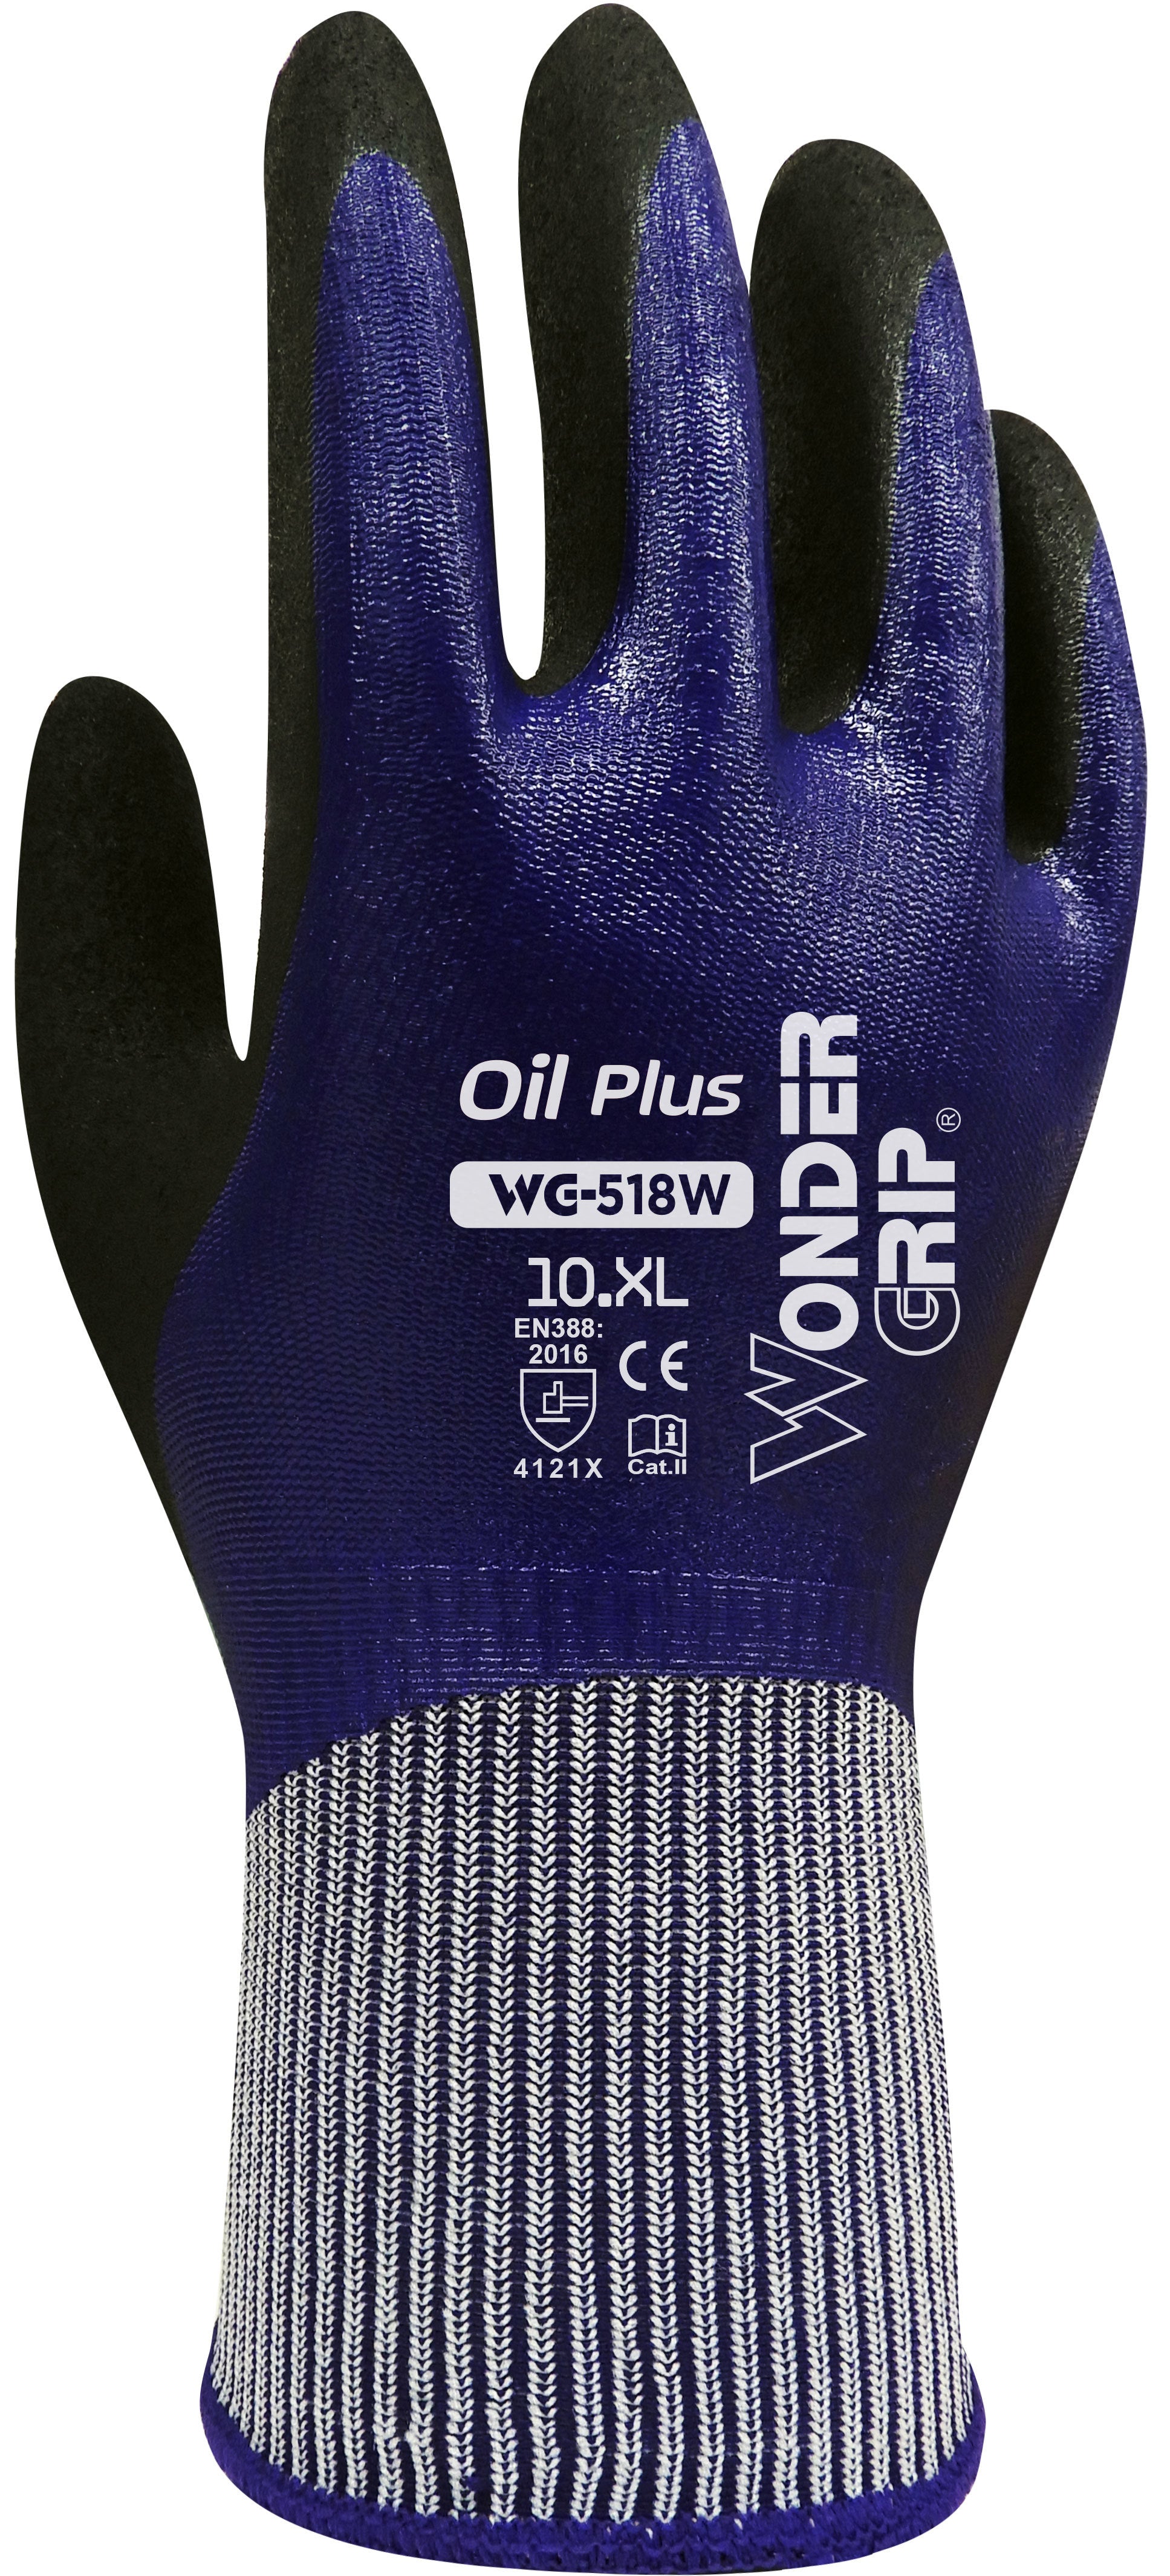 ATLAS RE-GRIP RUBBER-COATED GLOVES (PAIR)